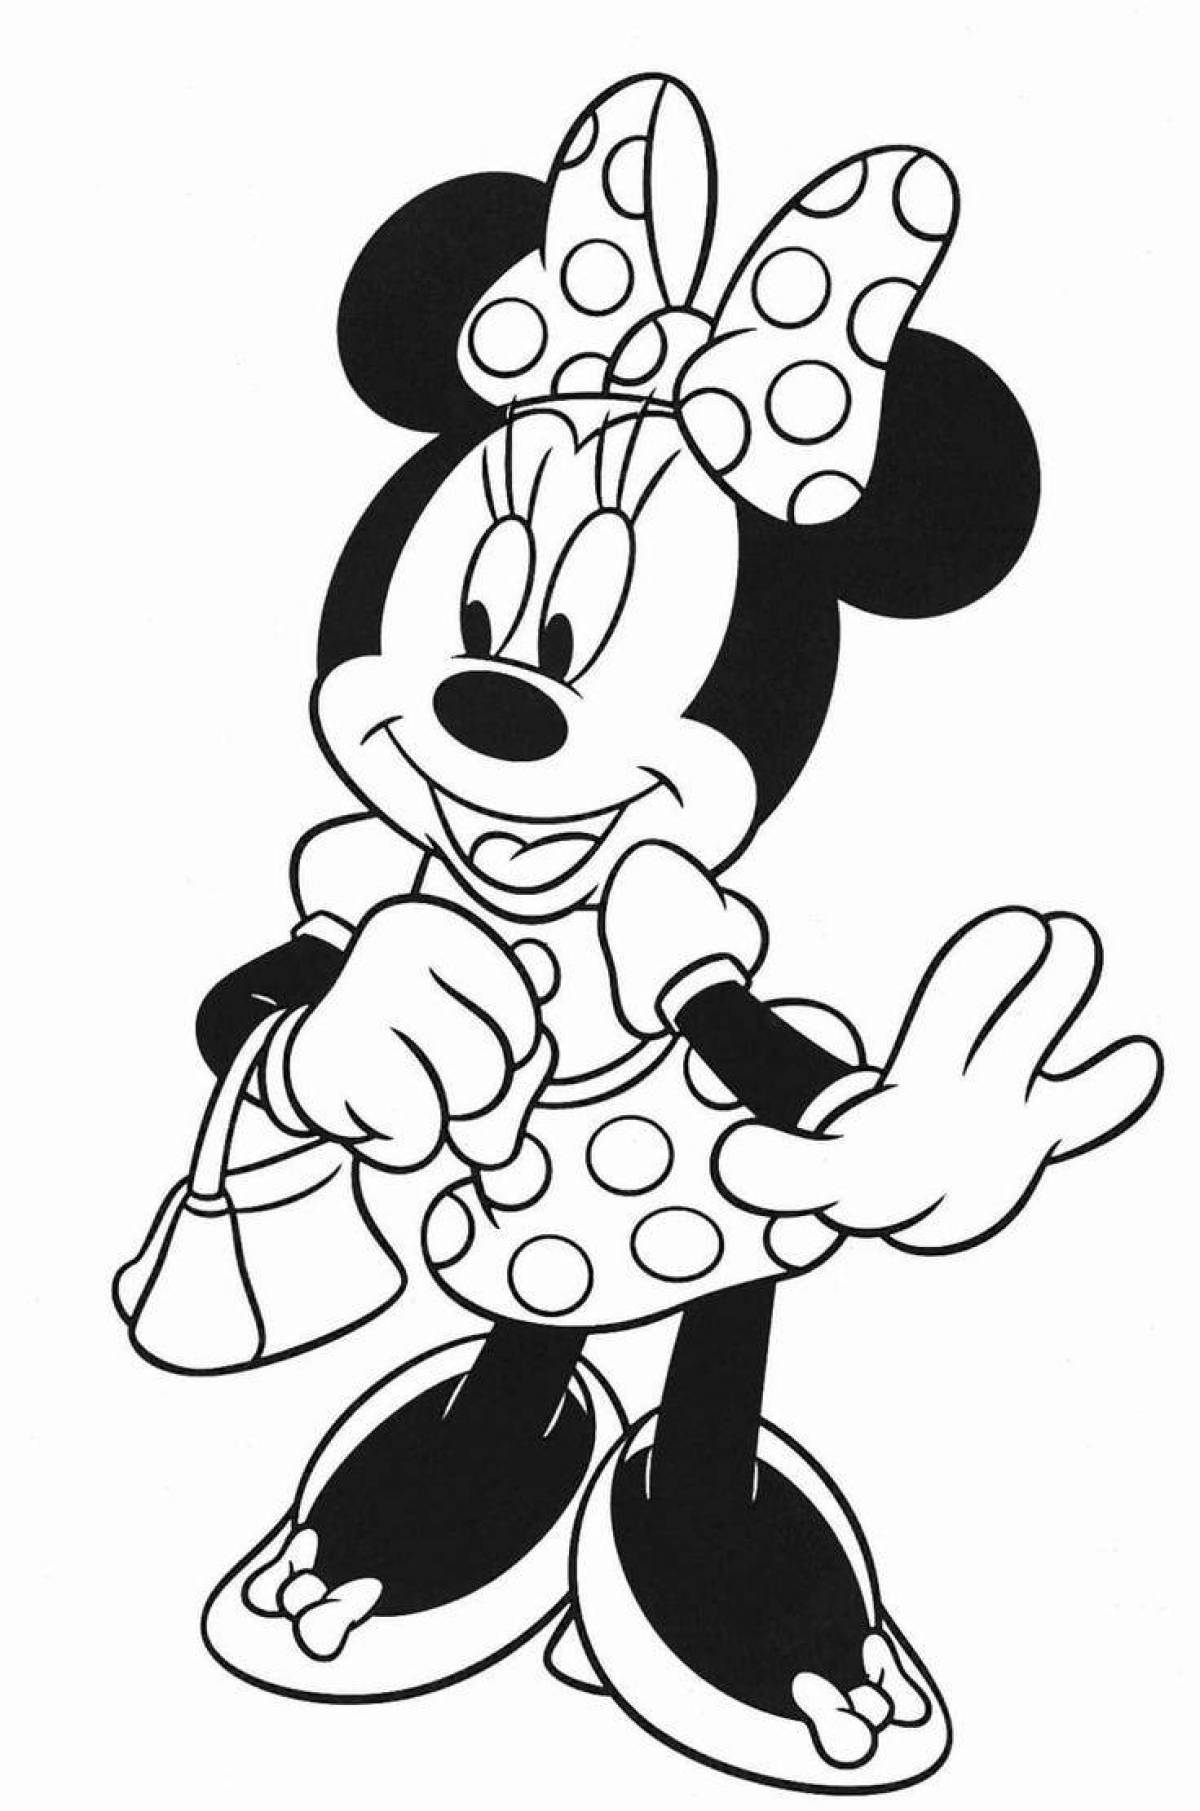 Blissful mickey mouse coloring book for girls